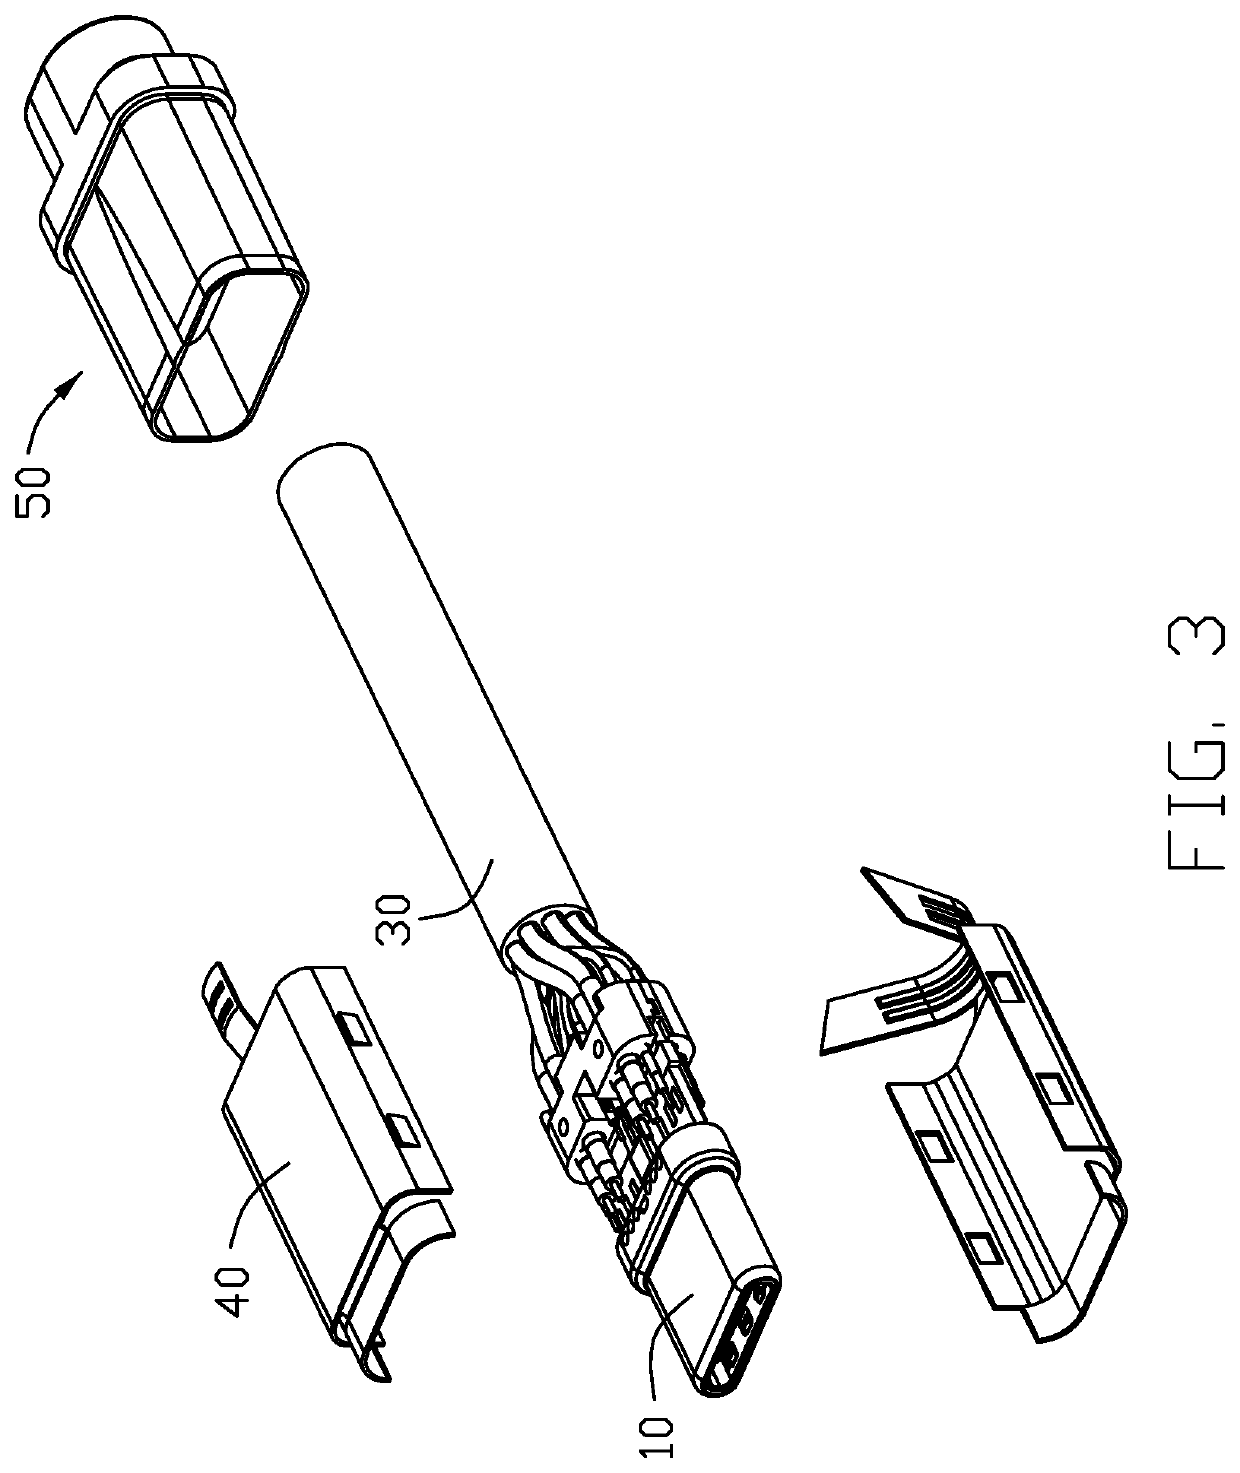 Cable connector assembly including coaxial wires and single core wires